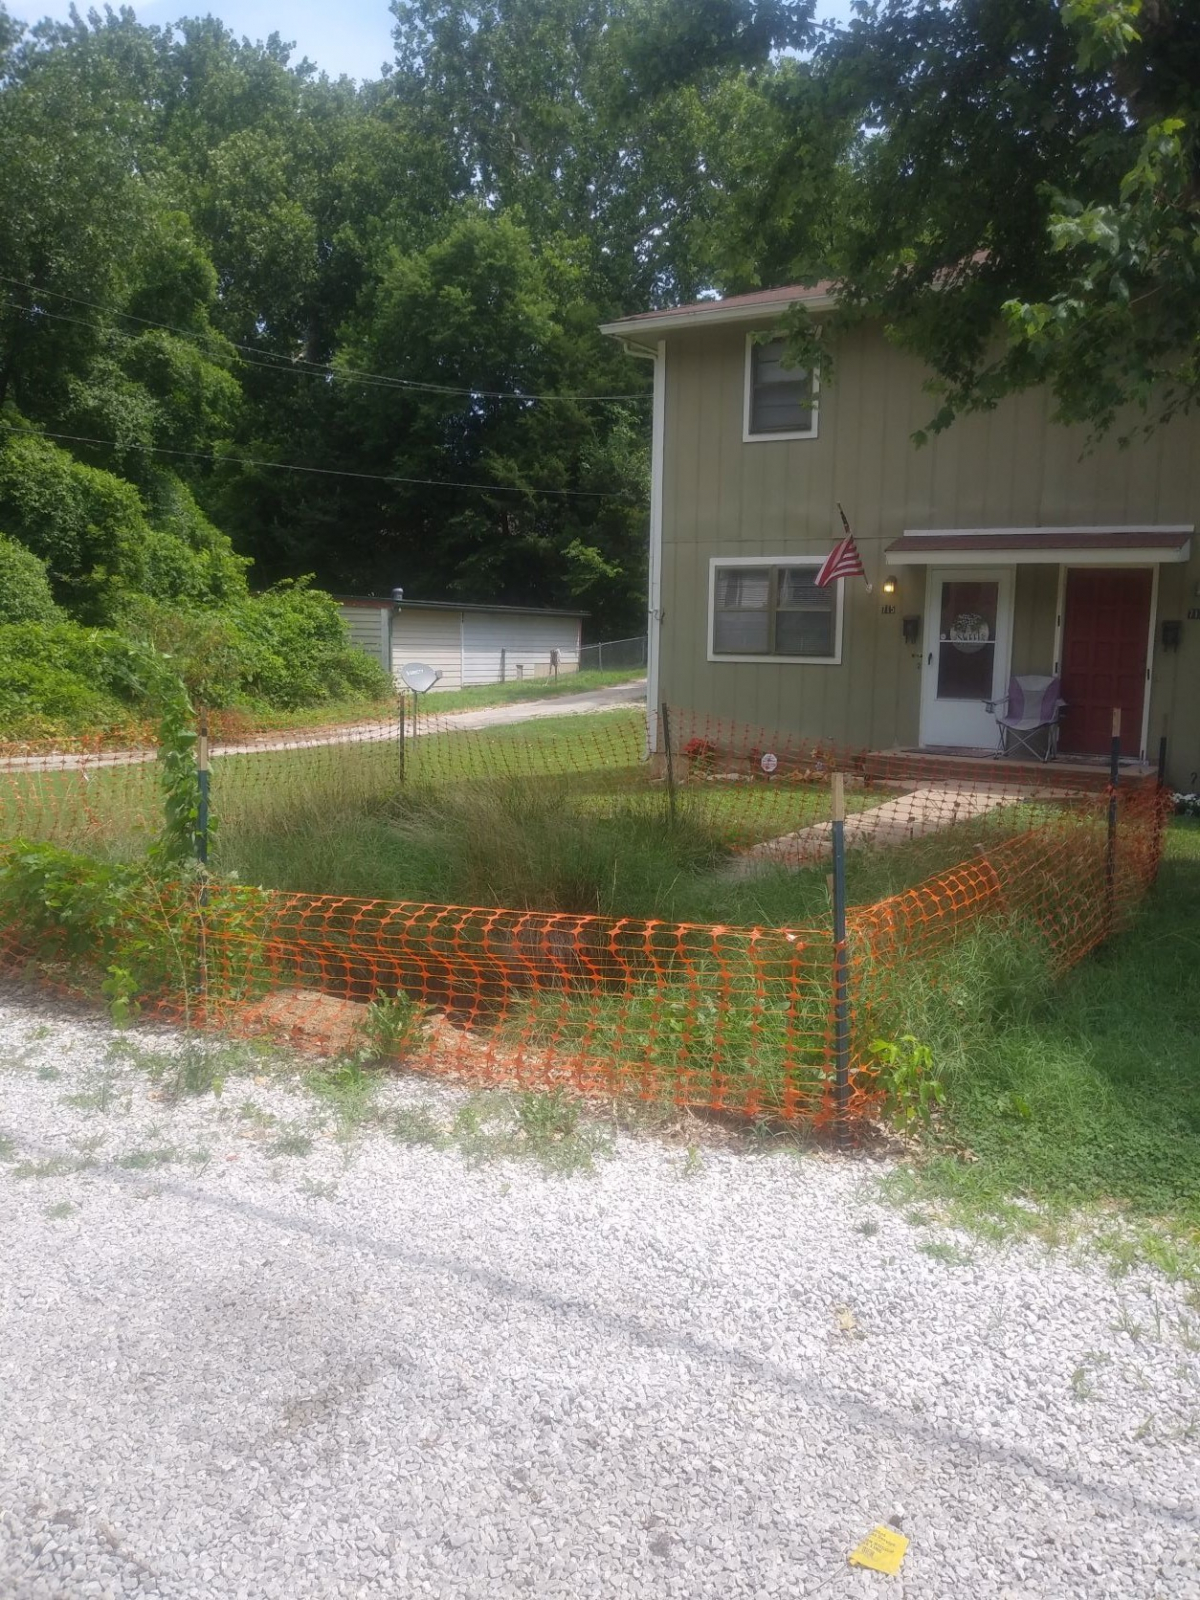 Photo of house with a sink hole blocked off with orange fencing